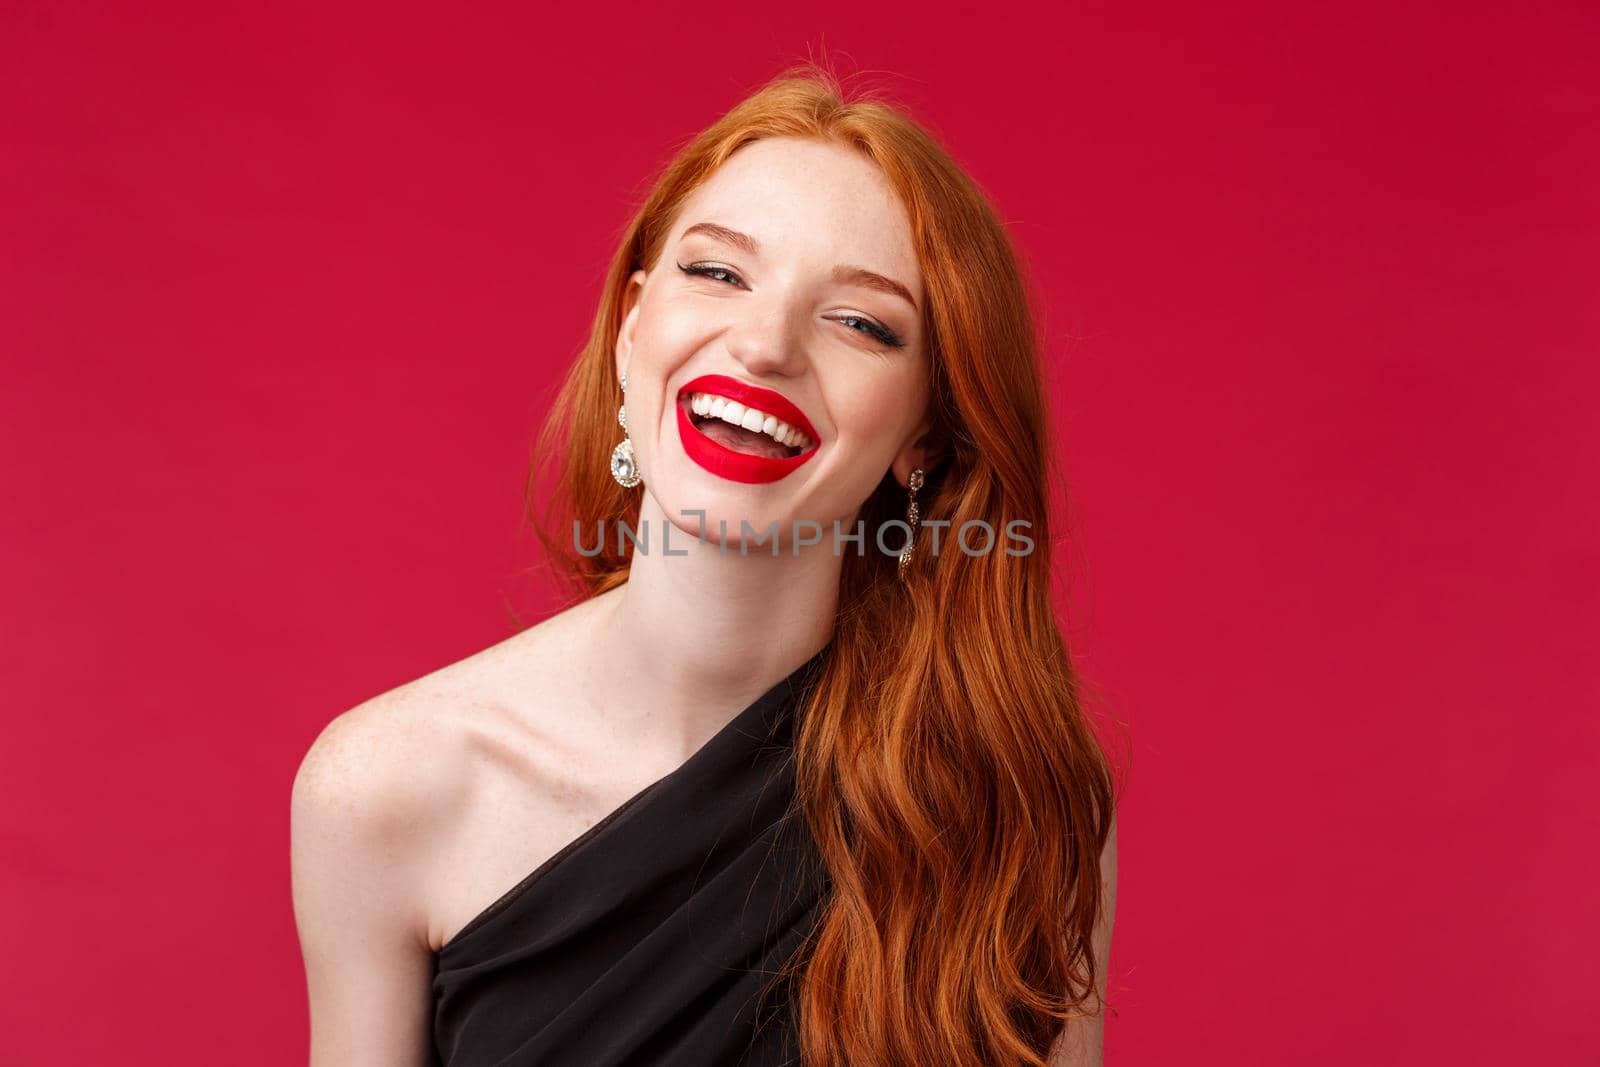 Romance, elegance, beauty and women concept. Close-up portrait of happy, cheerful redhead woman in luxurious black dress, red lipstick, enjoying party or date, laughing beaming smile.